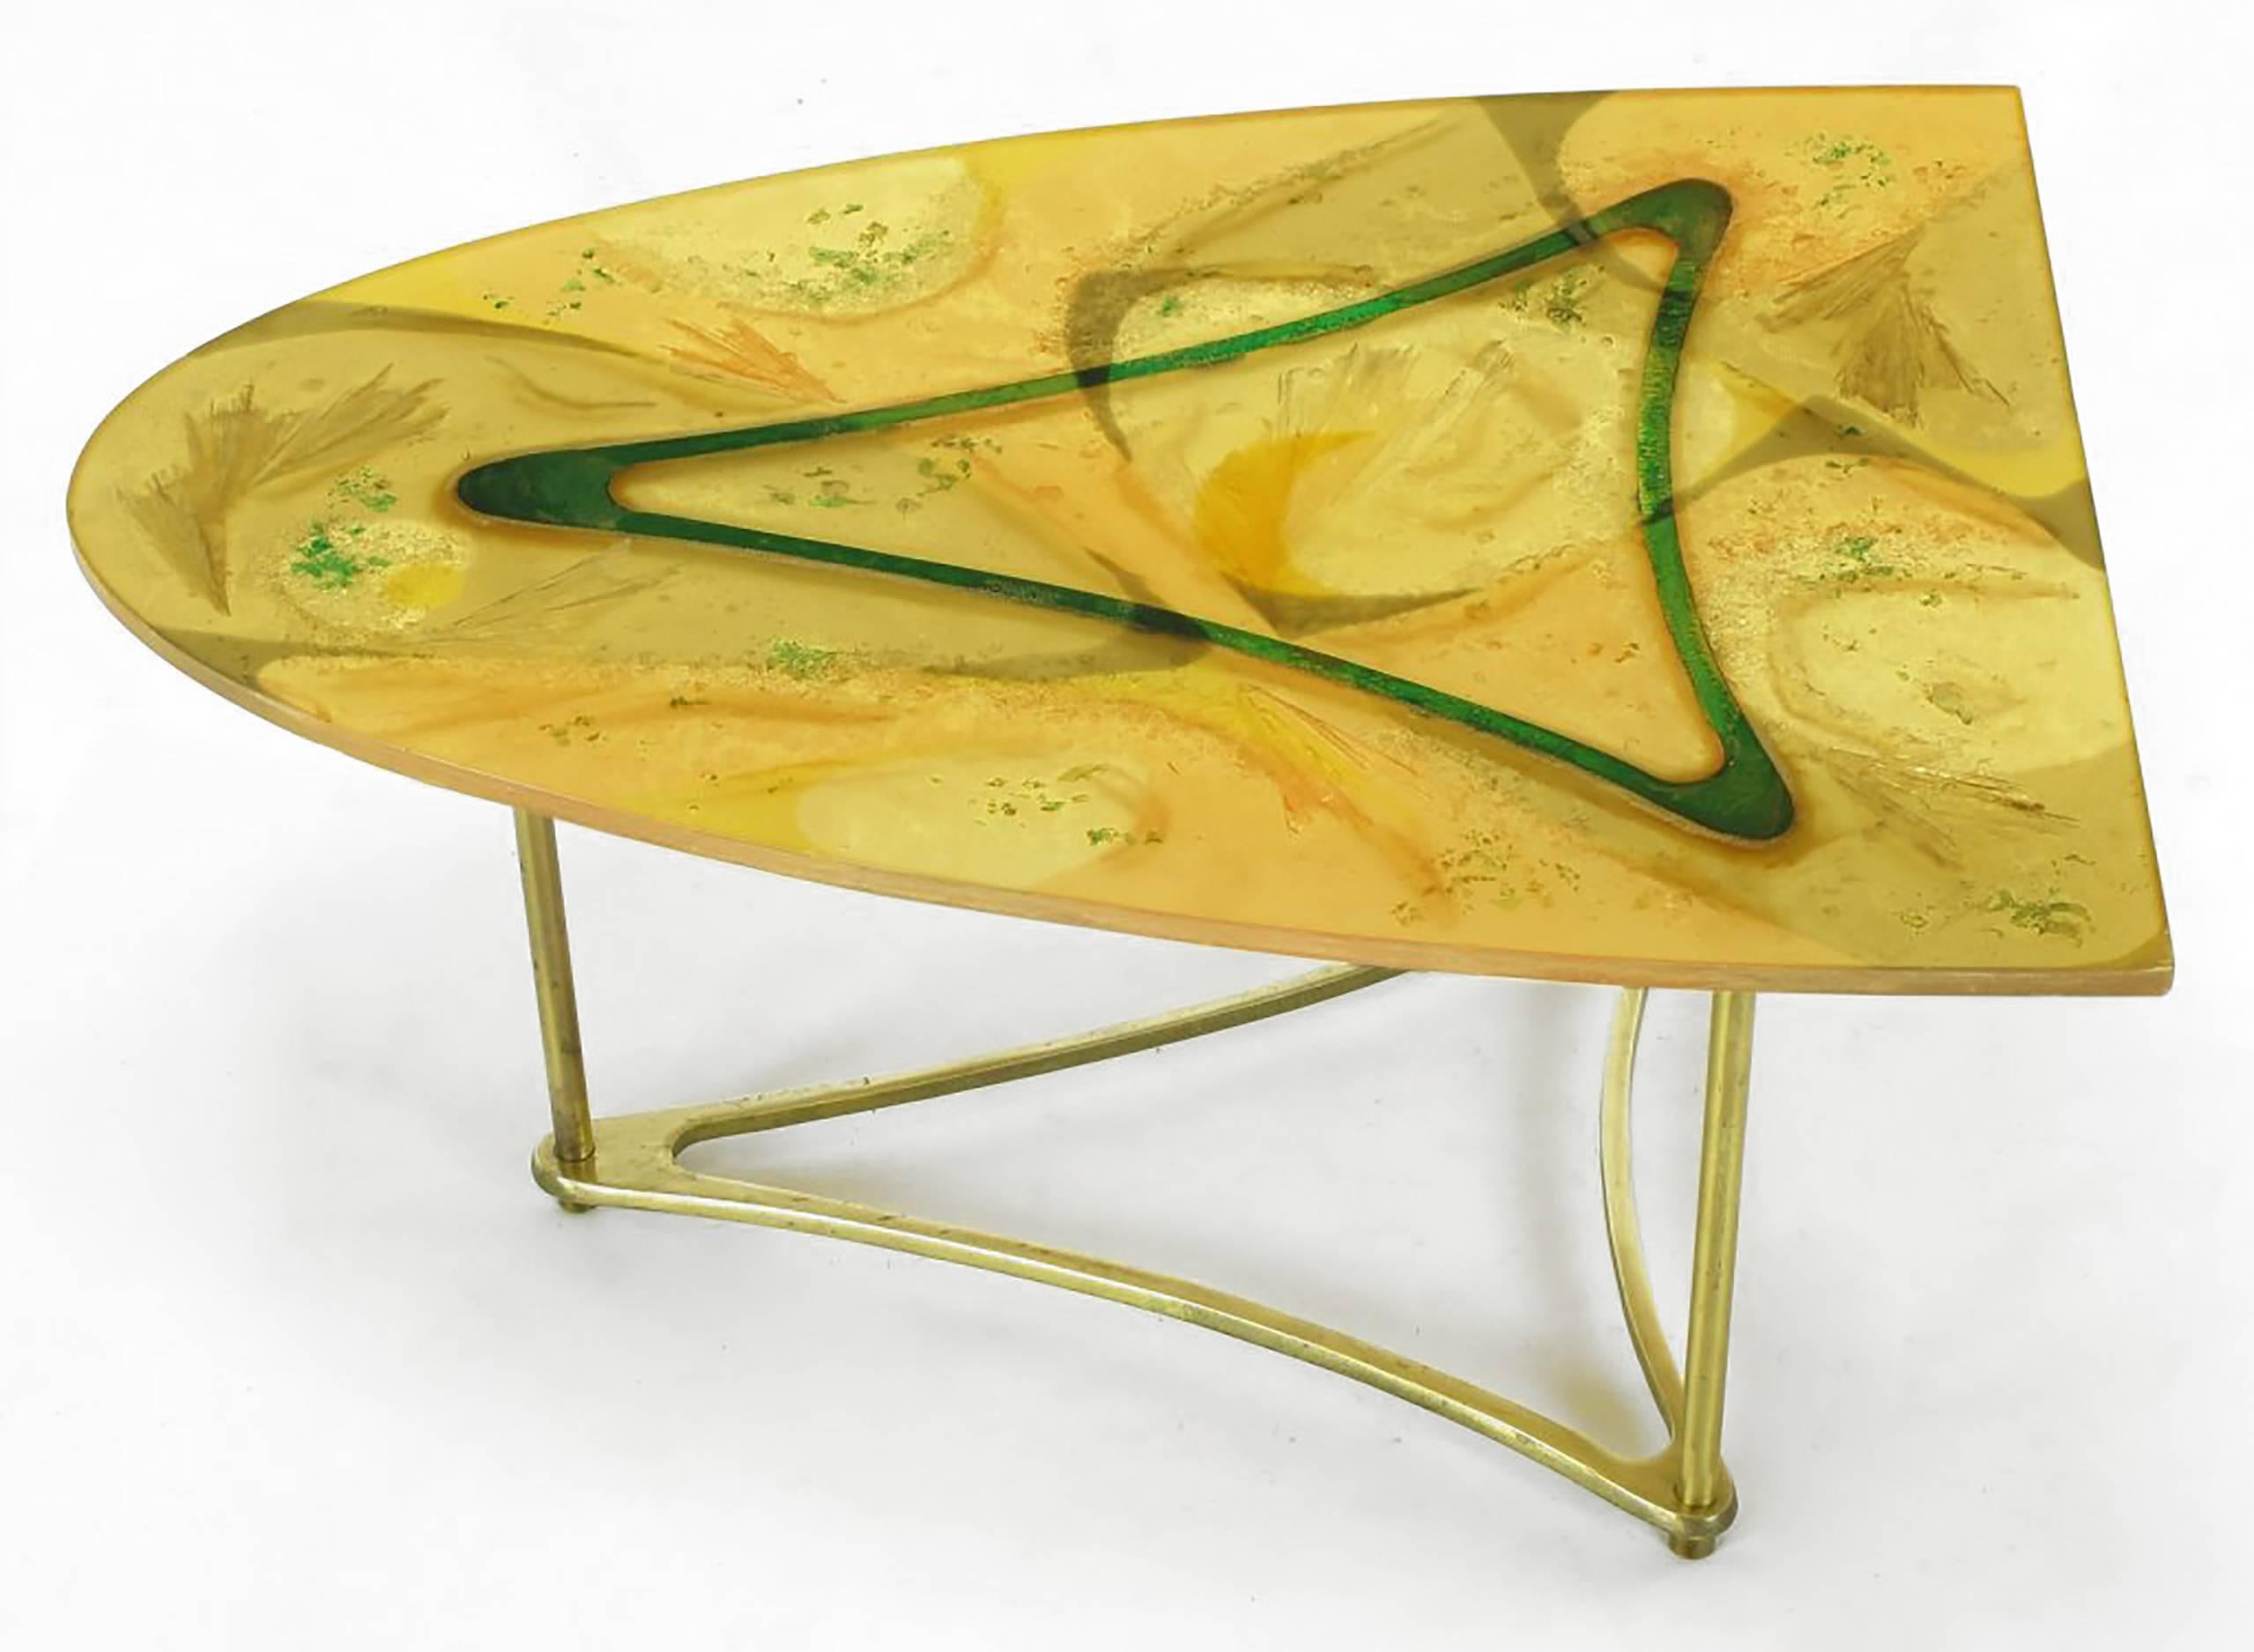 One third surf board shaped side table on triangular brass base. Three brass legs attach the triangular brass base to the abstract designed umber, gold and green semi opaque resin top. One of a kind artist designed coffee table. Looks to be of